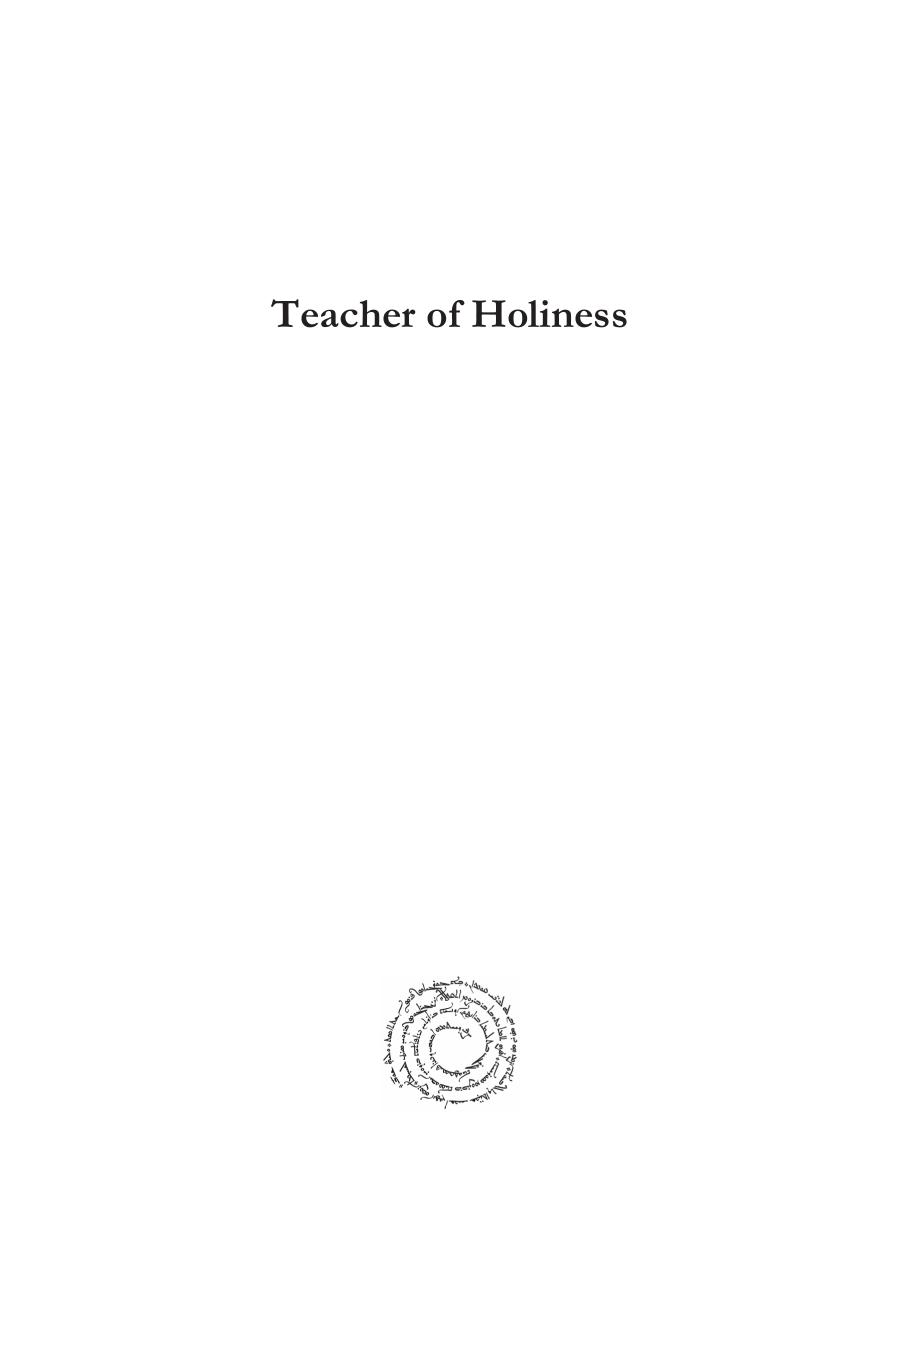 Teacher of Holiness: The Holy Spirit in Origen's Commentary on the Epistle to the Romans by Maureen Beyer Moser